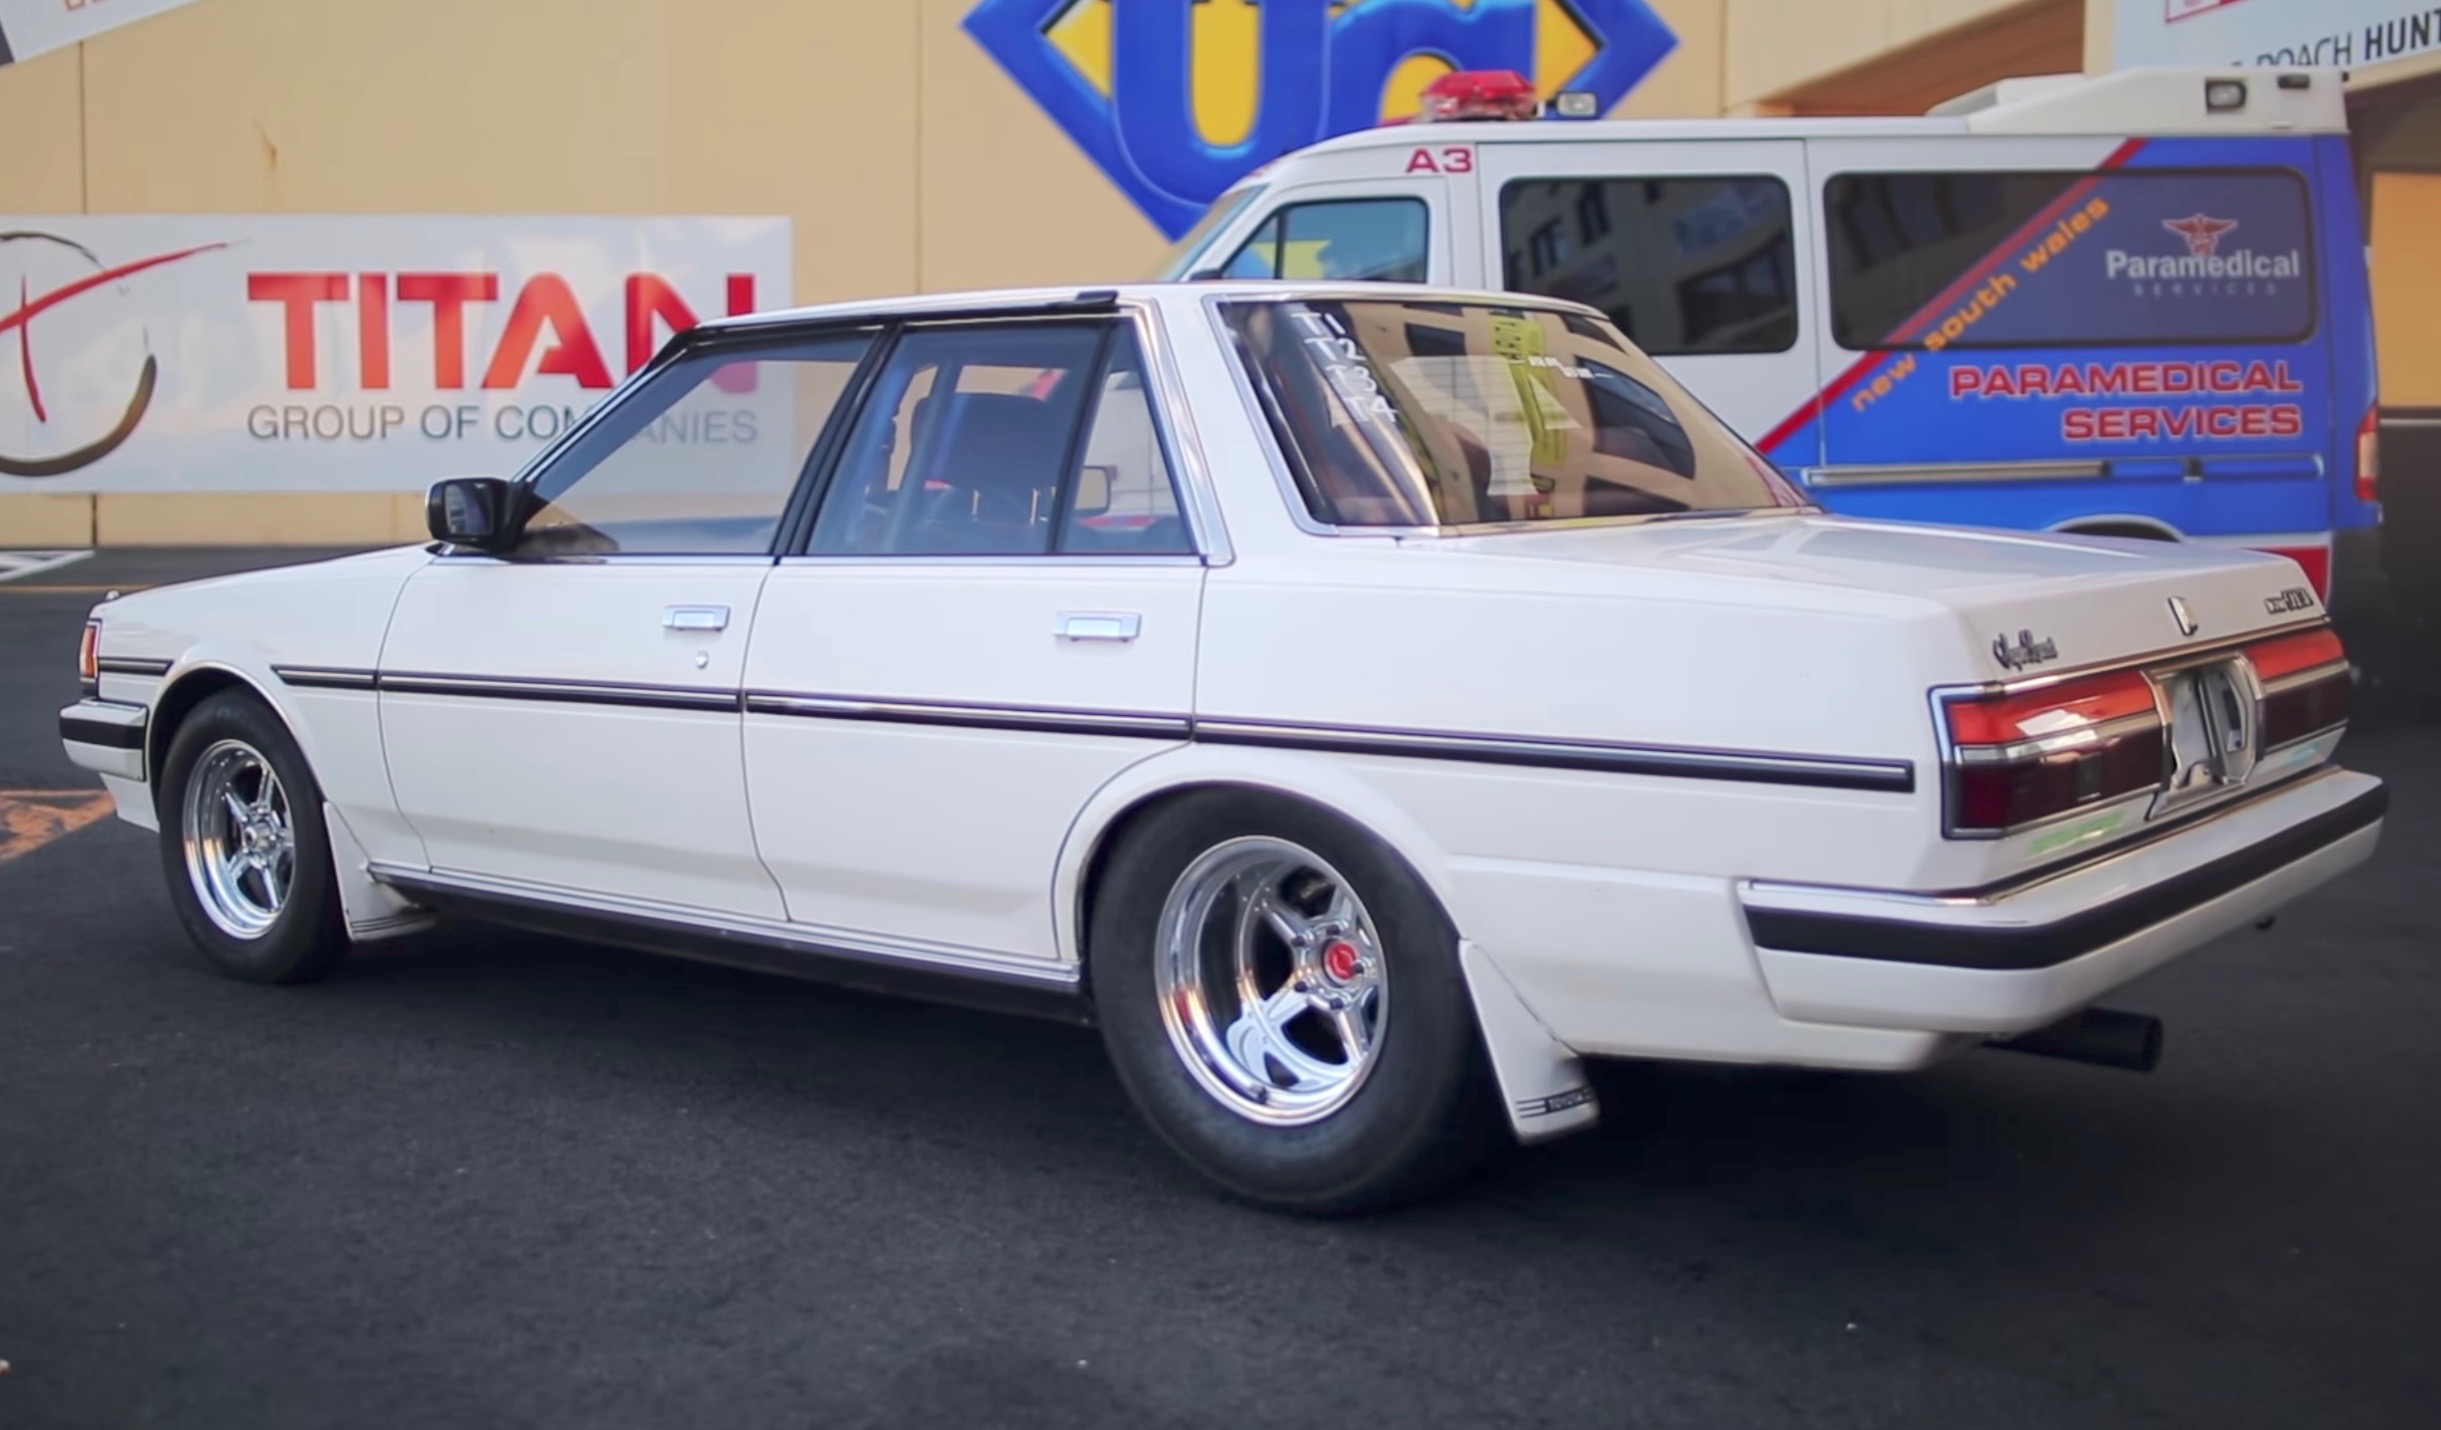 Toyota Cresta with Barra Ford Falcon engine makes awesome sleeper (video)